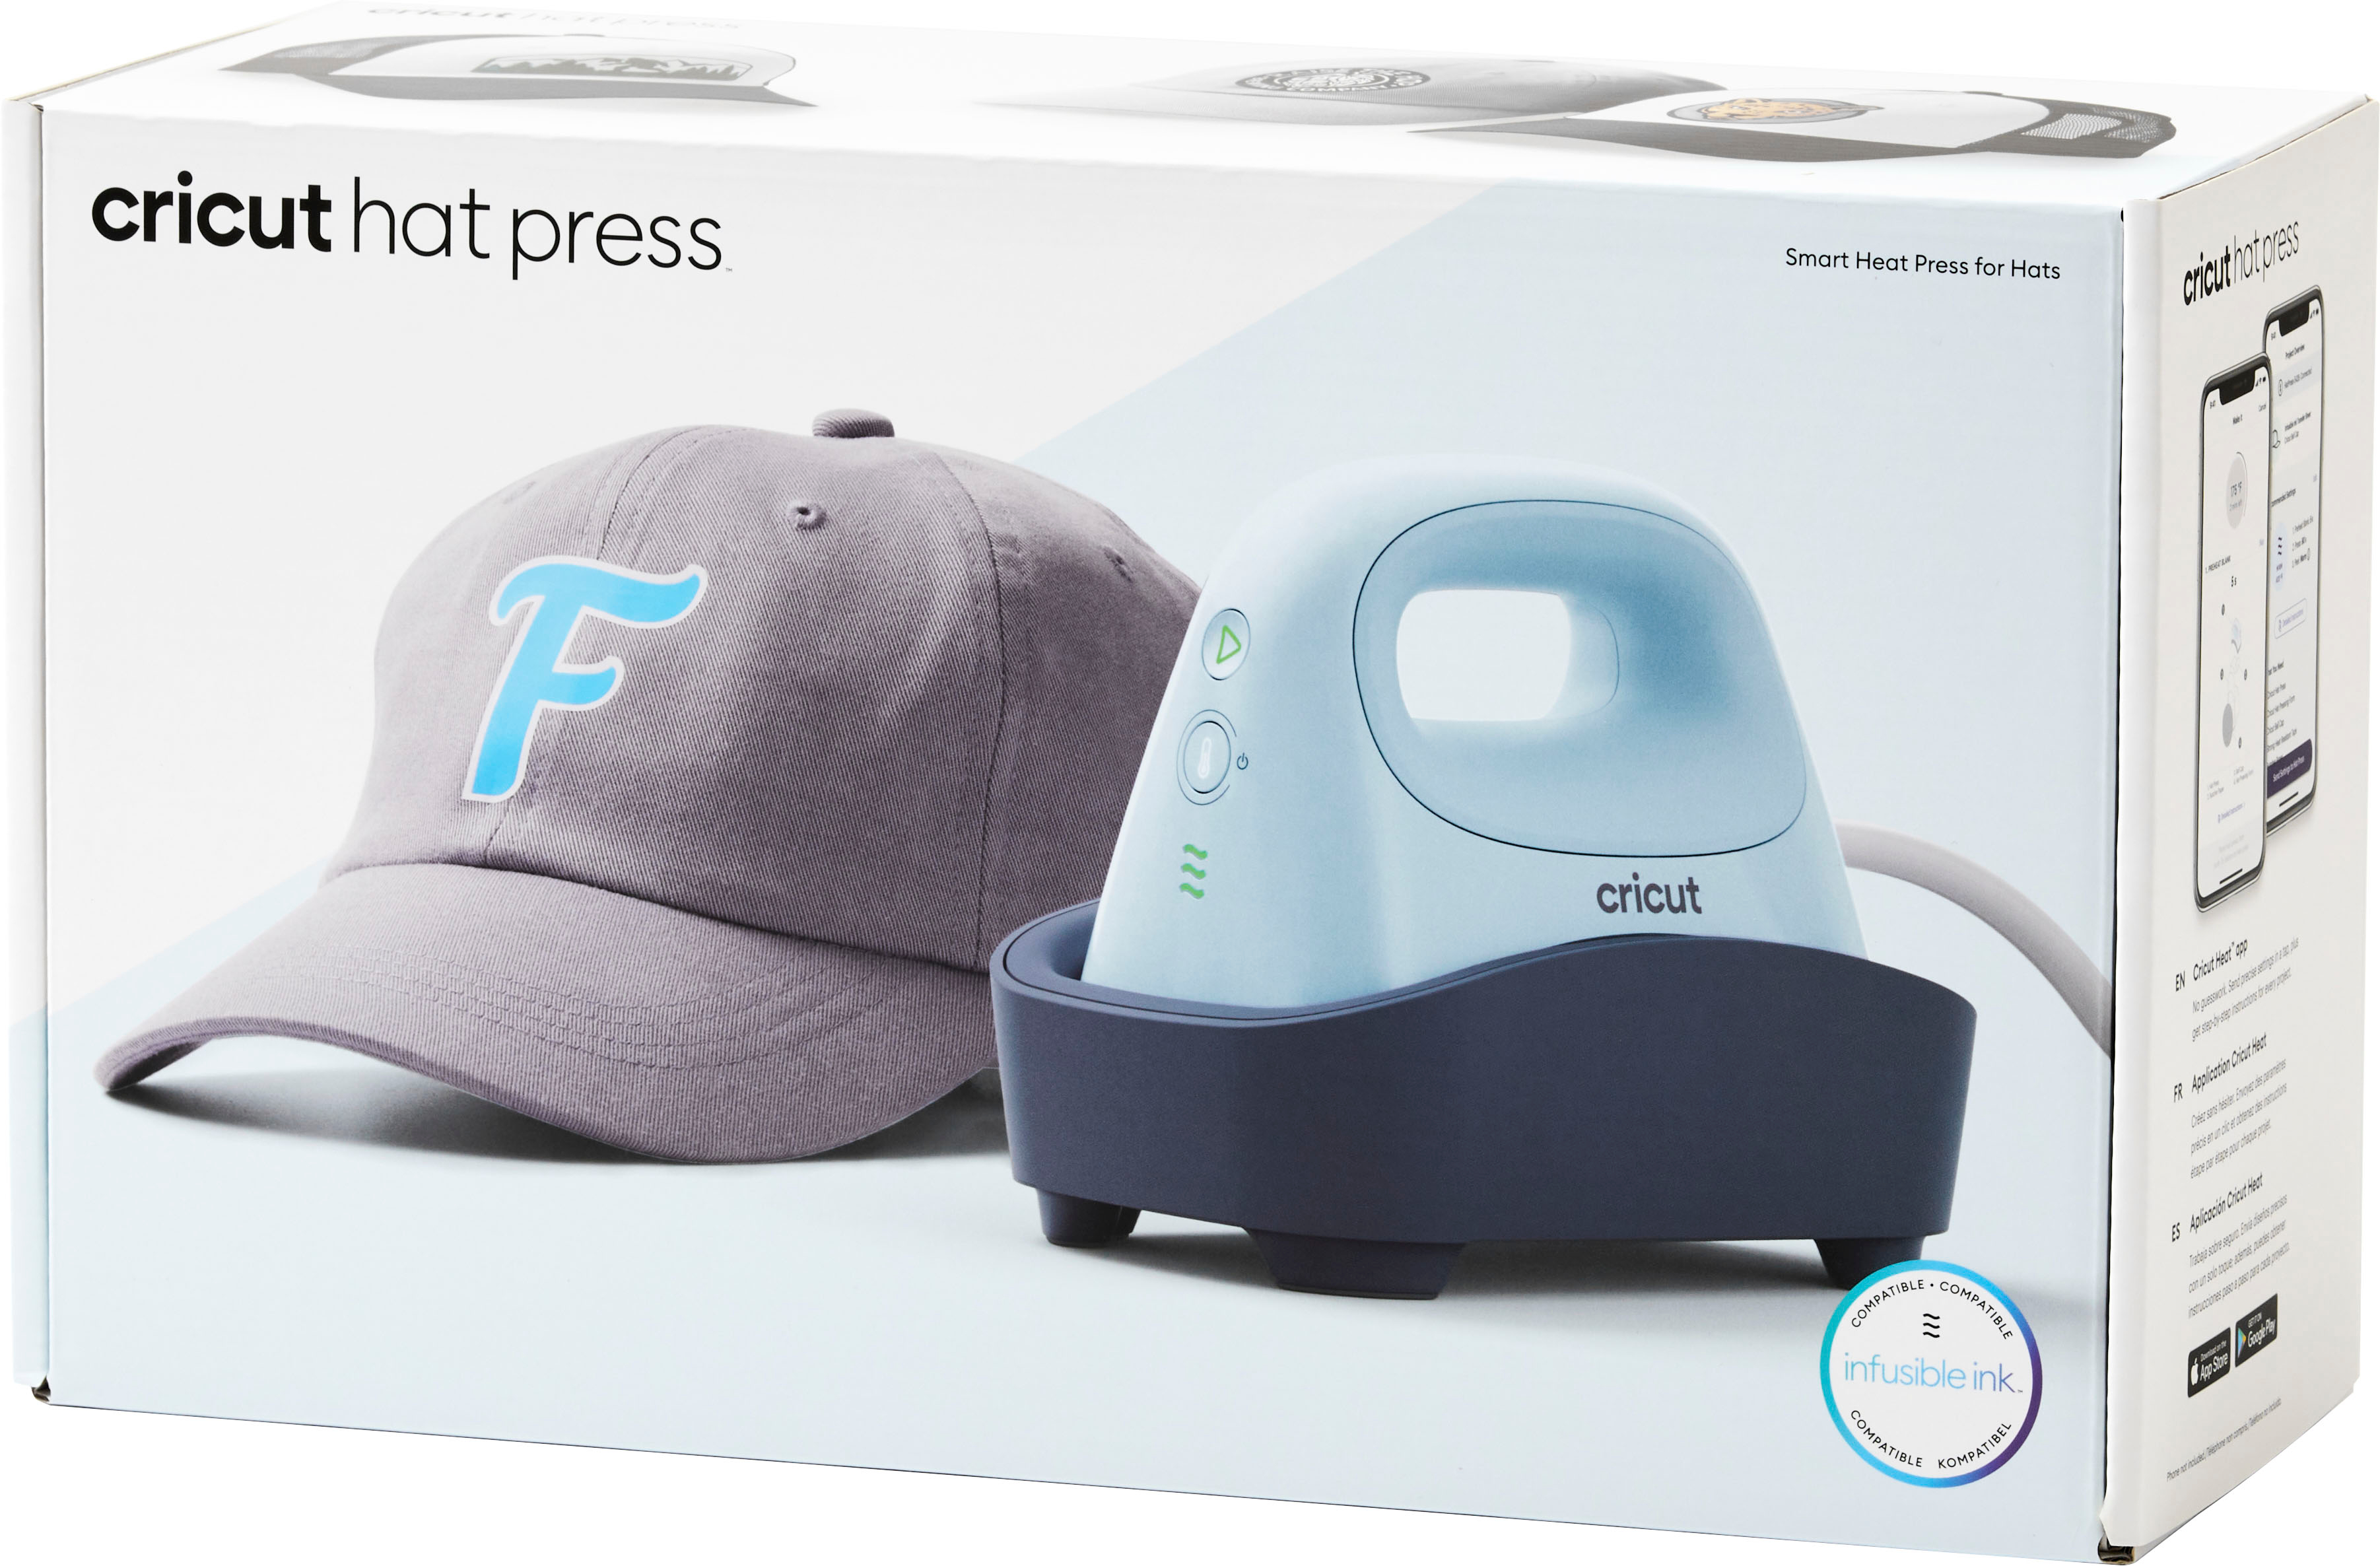 Cricut Hat Press: Ultimate Guide to Iron-On Vinyl and Infusible Ink Hats! -  Jennifer Maker